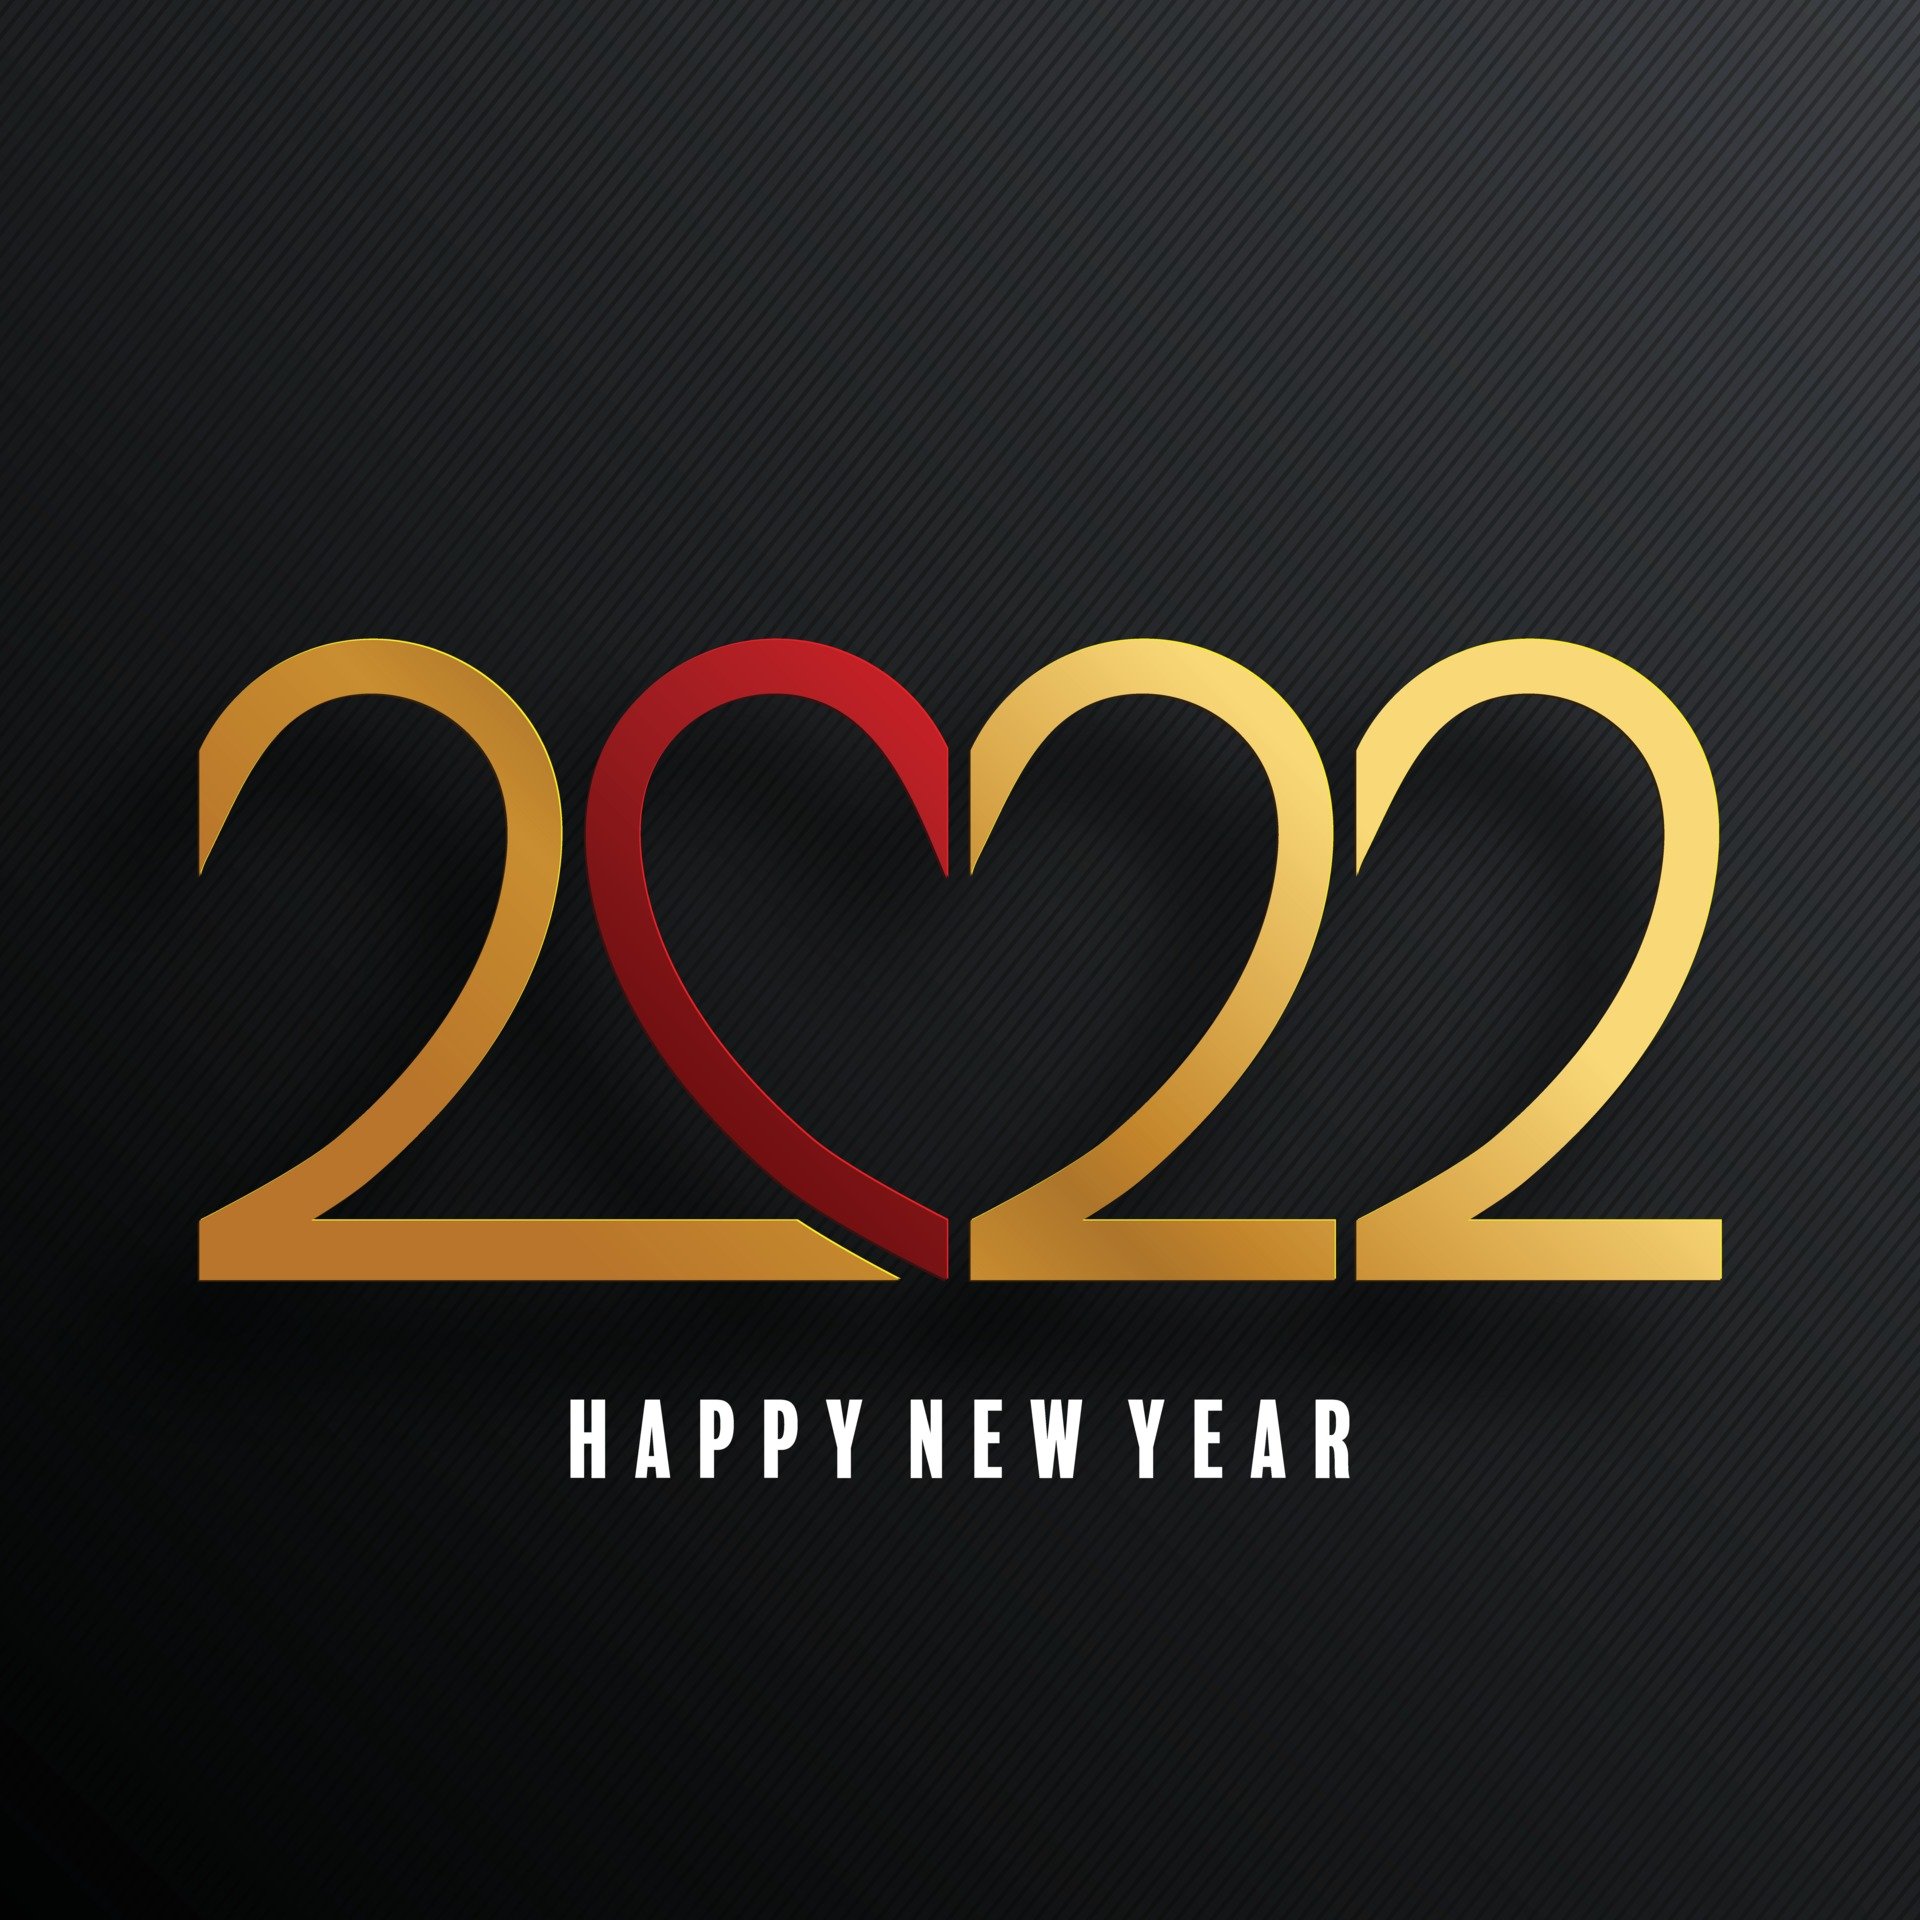 Wallpapers 2022 new year 2022 holiday on the desktop